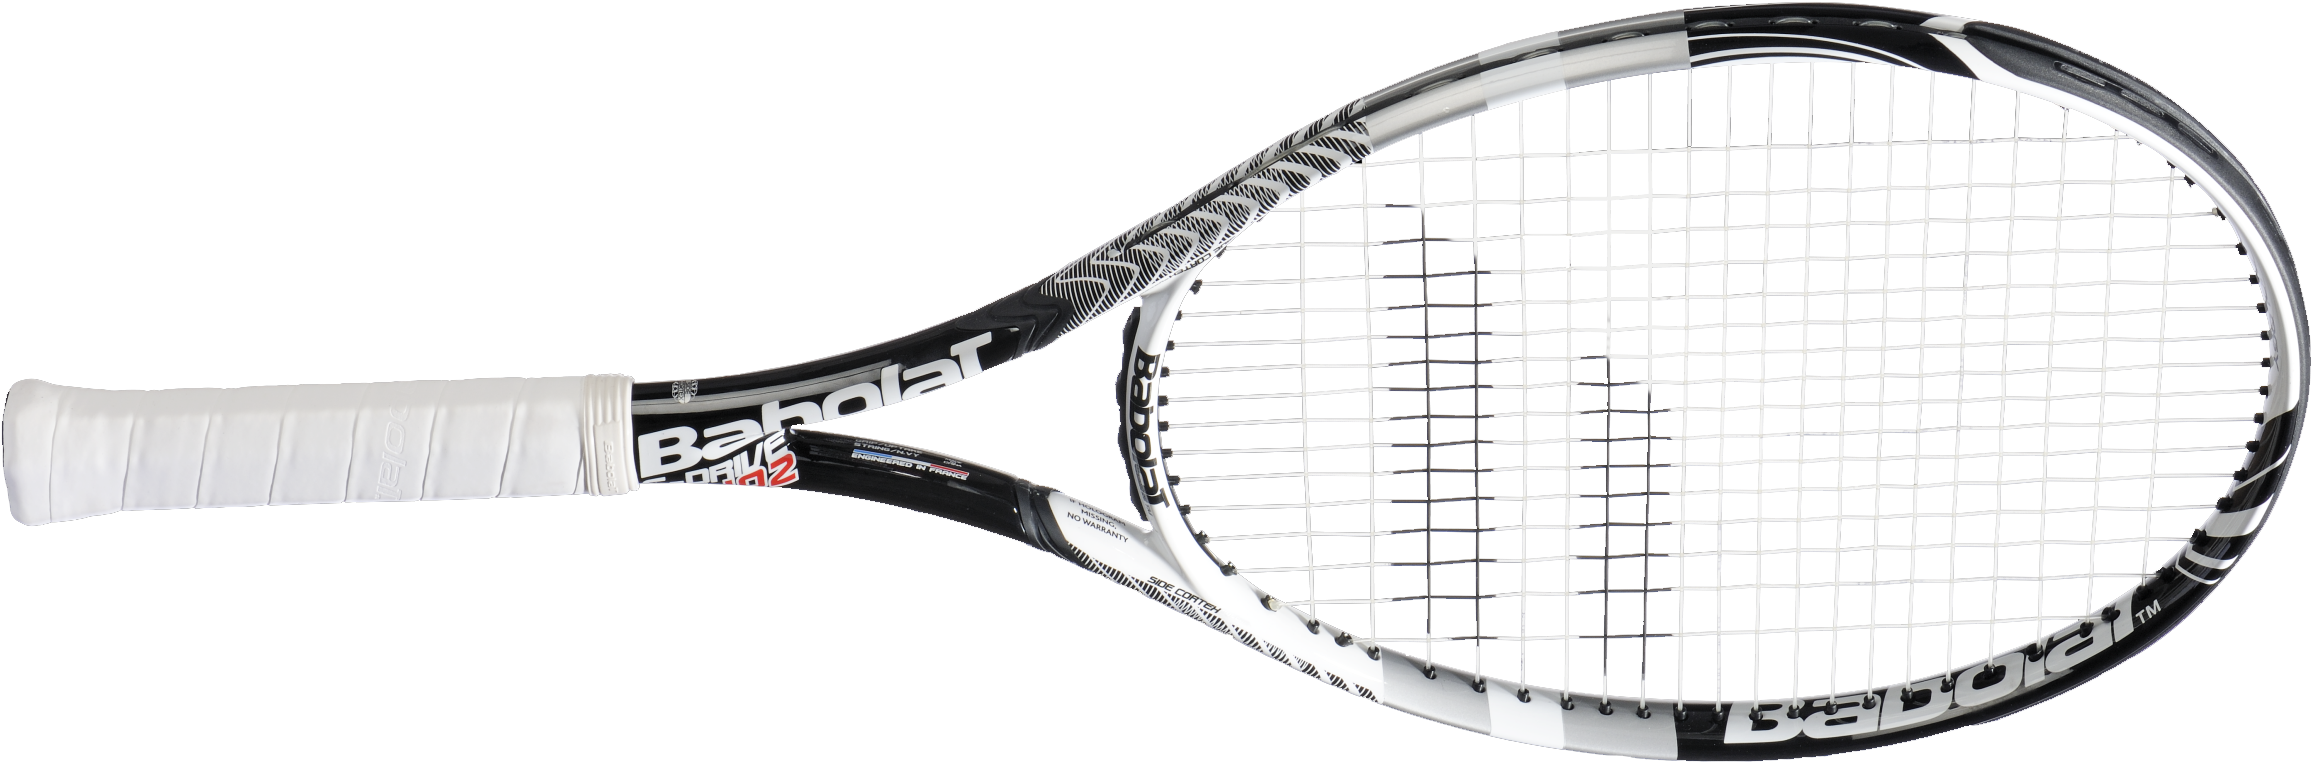 Professional Tennis Racket Isolated PNG